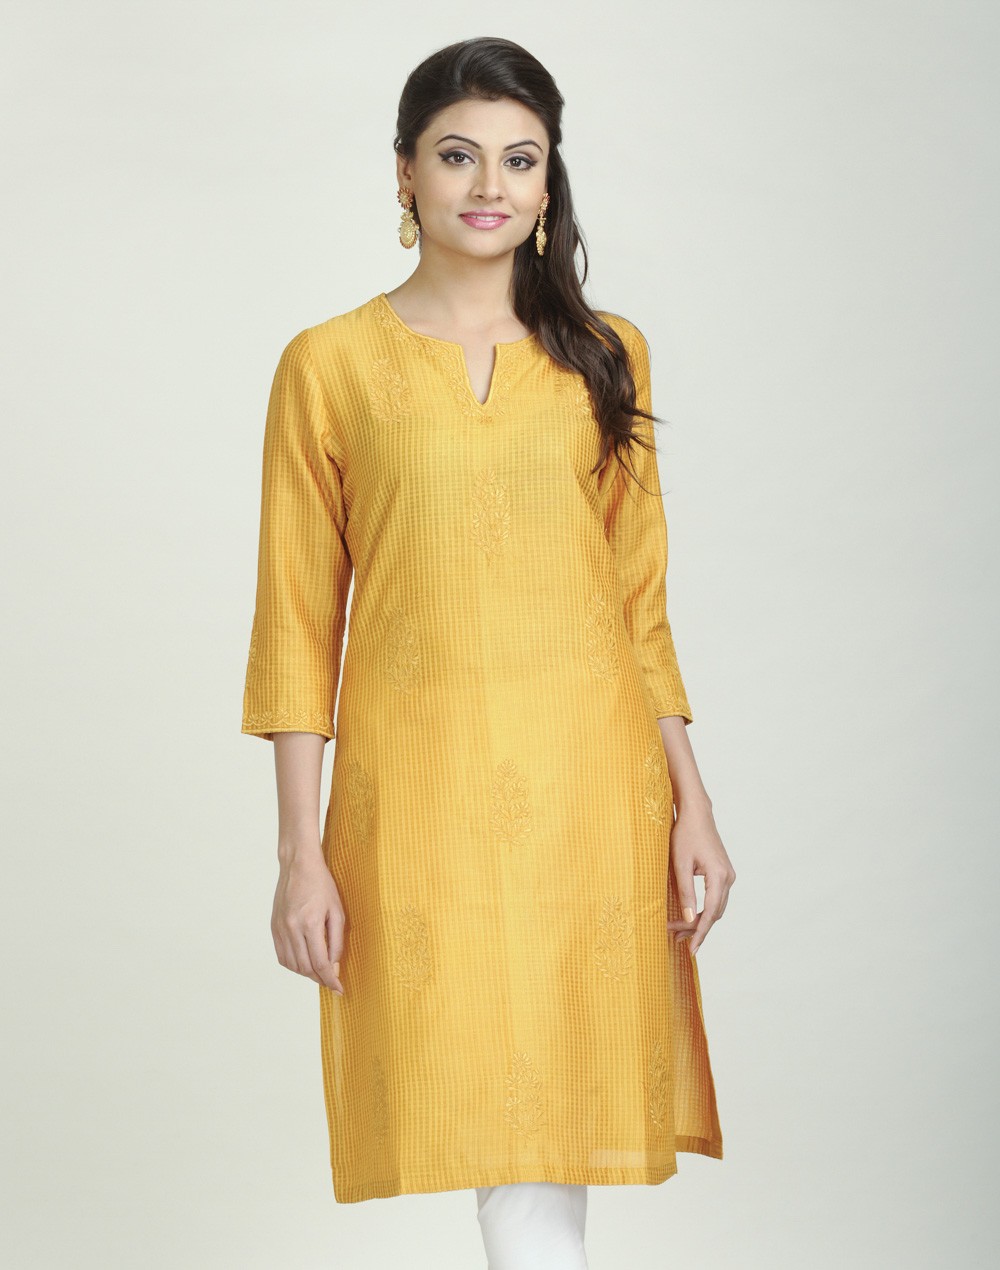 Latest Women Best Kurti Designs Collection For Winter by Fabindia 2015-2016 (26)